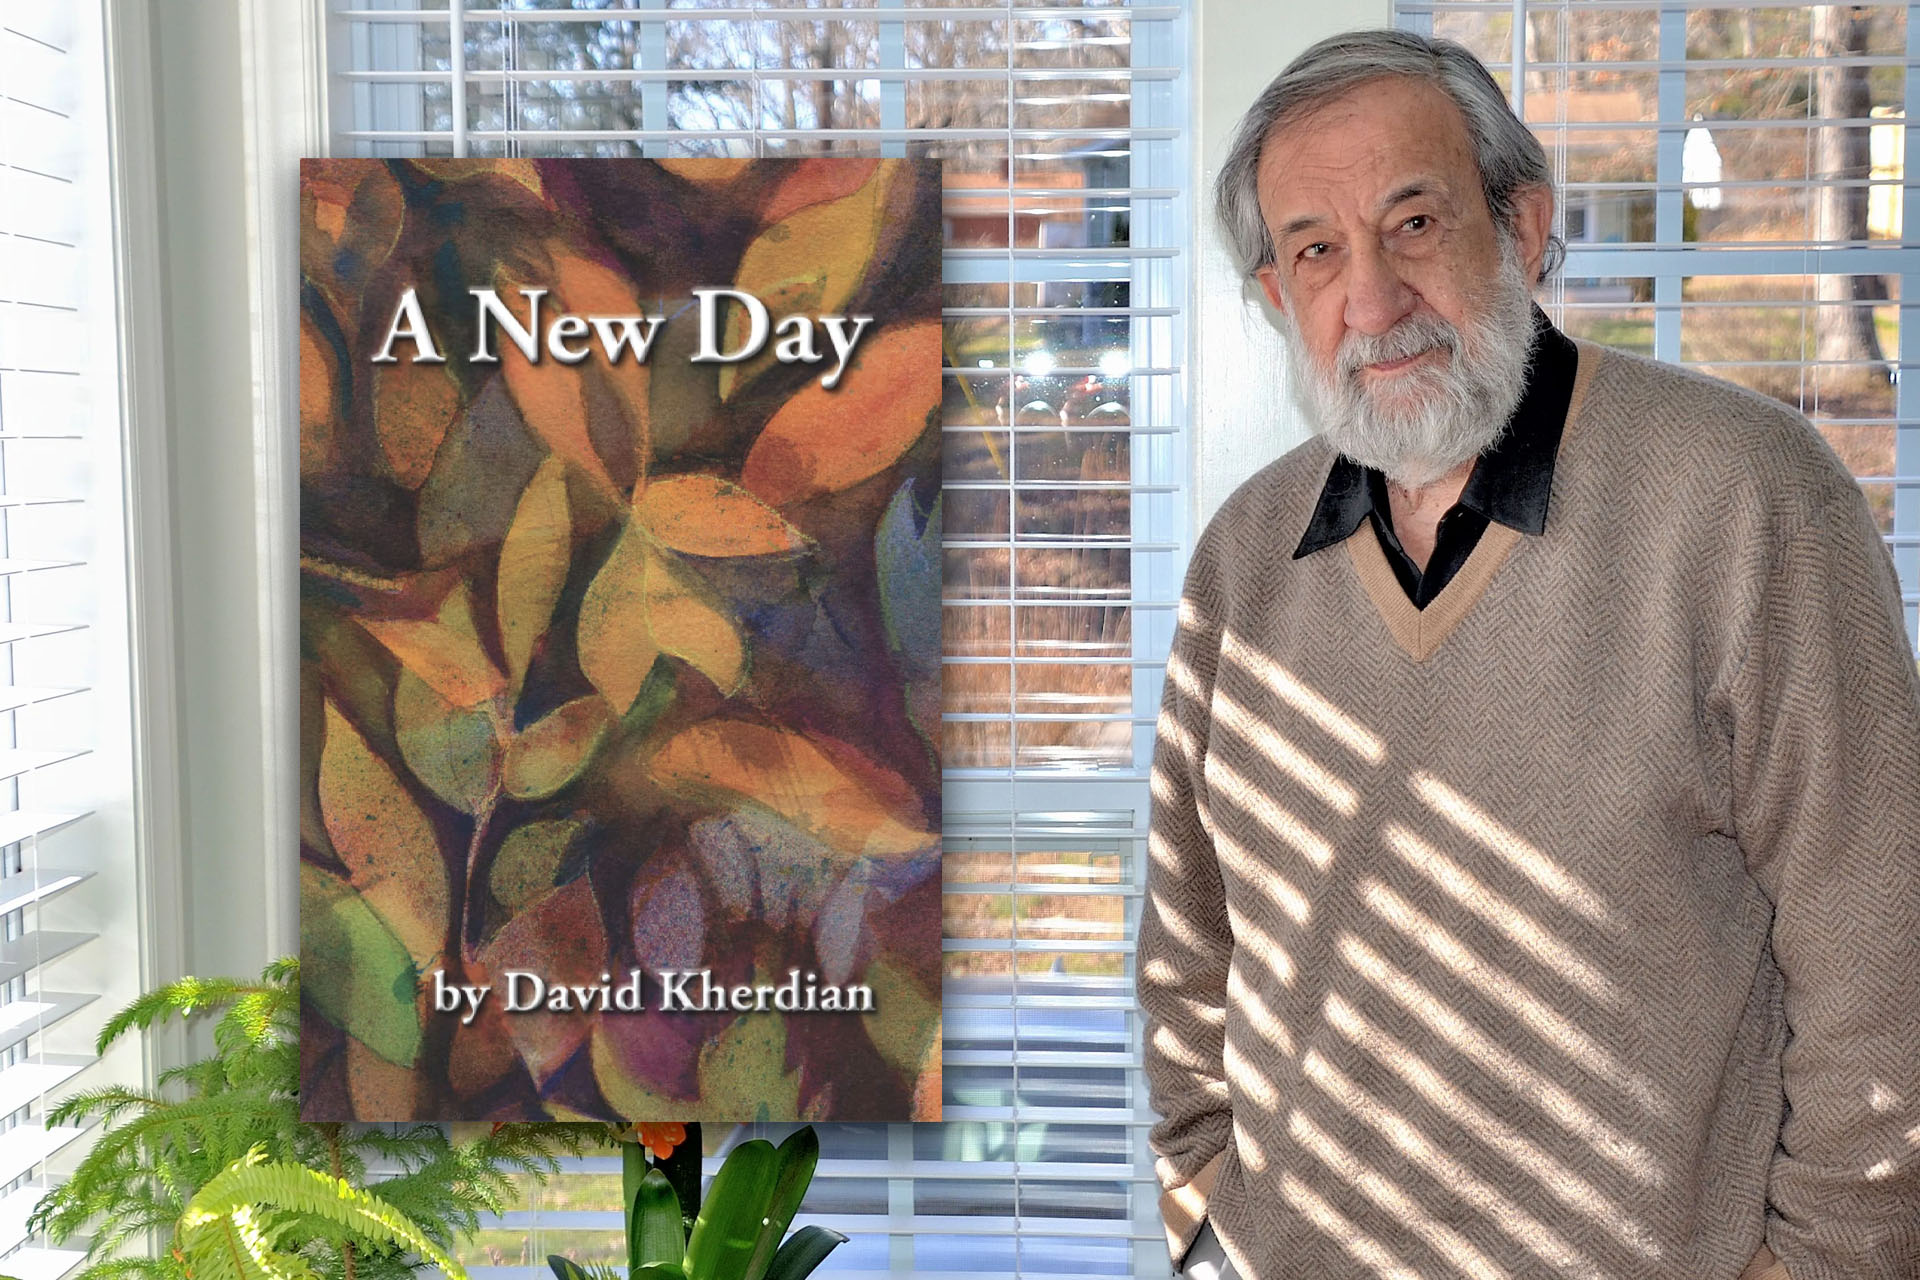 "A New Day" by David Kherdian